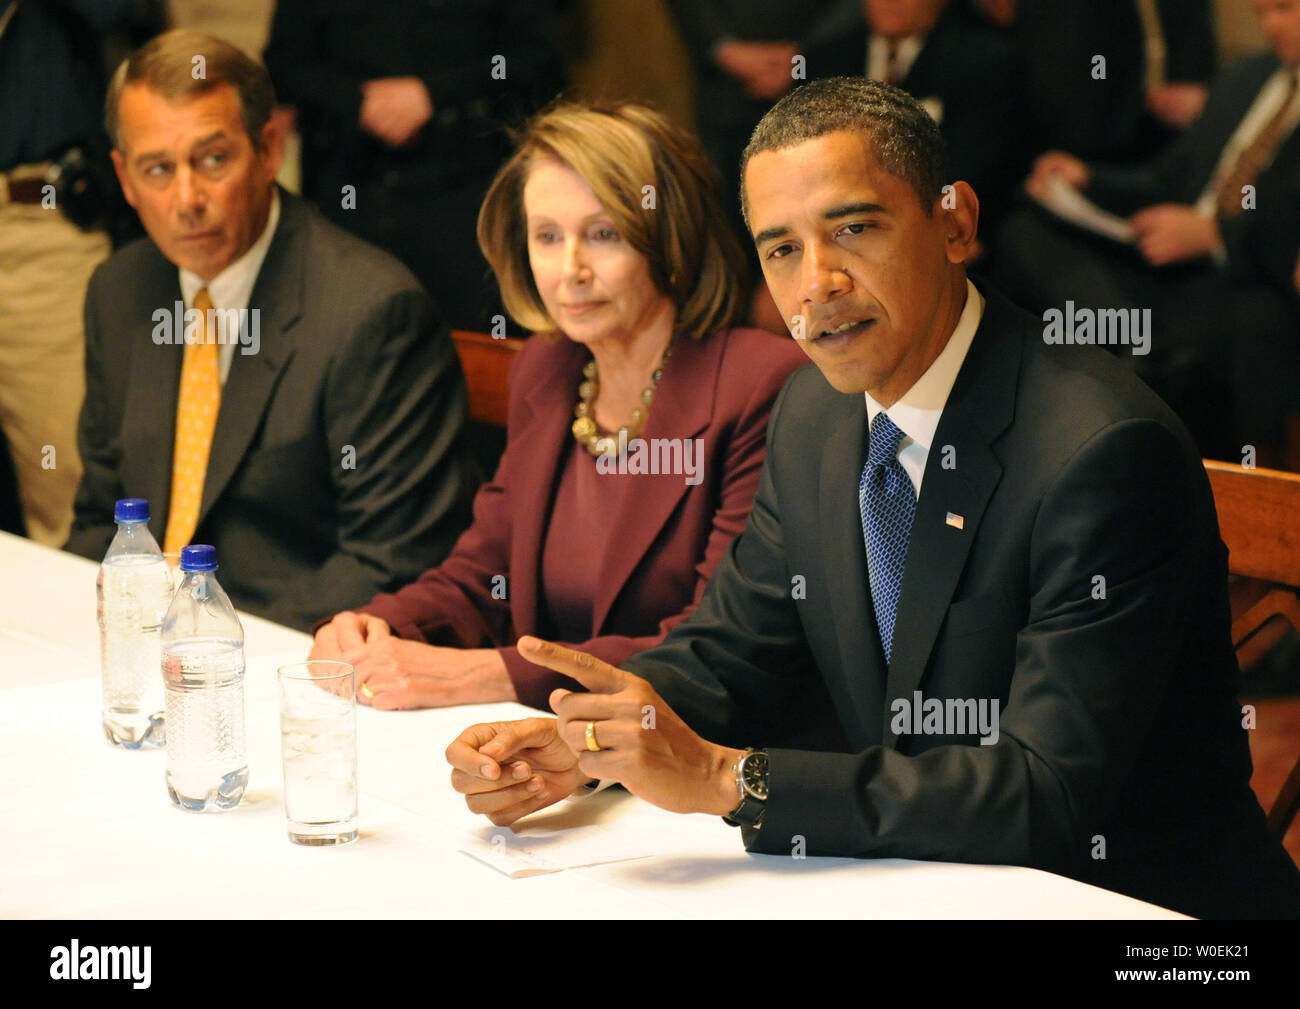 President-elect Barack Obama (R) delivers remarks alongside Speaker of the House Nancy Pelosi (D-CA) (C) and House Minority Leader John Boehner (R-OH) during a meeting with Congressional leaders on Capitol Hill in Washington on January 5, 2008. (UPI Photo/Kevin Dietsch) Stock Photo